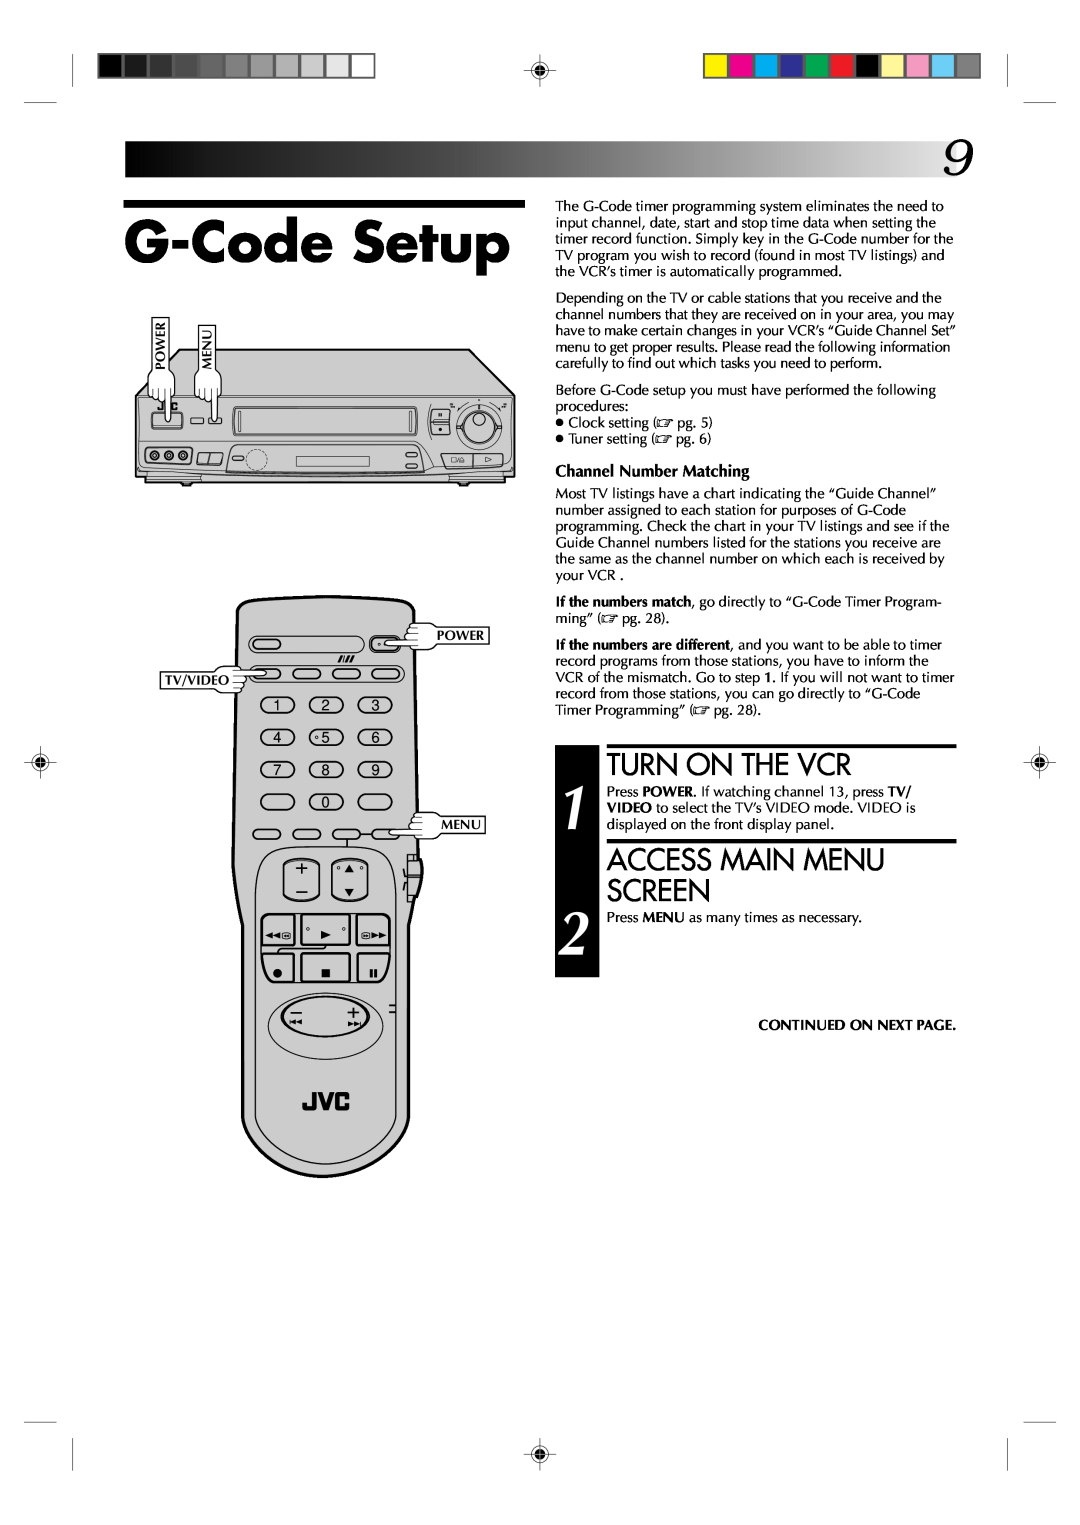 JVC HR-J631T manual G-Code Setup, Access Main Menu Screen, Turn On The Vcr, Channel Number Matching, Continued On Next Page 